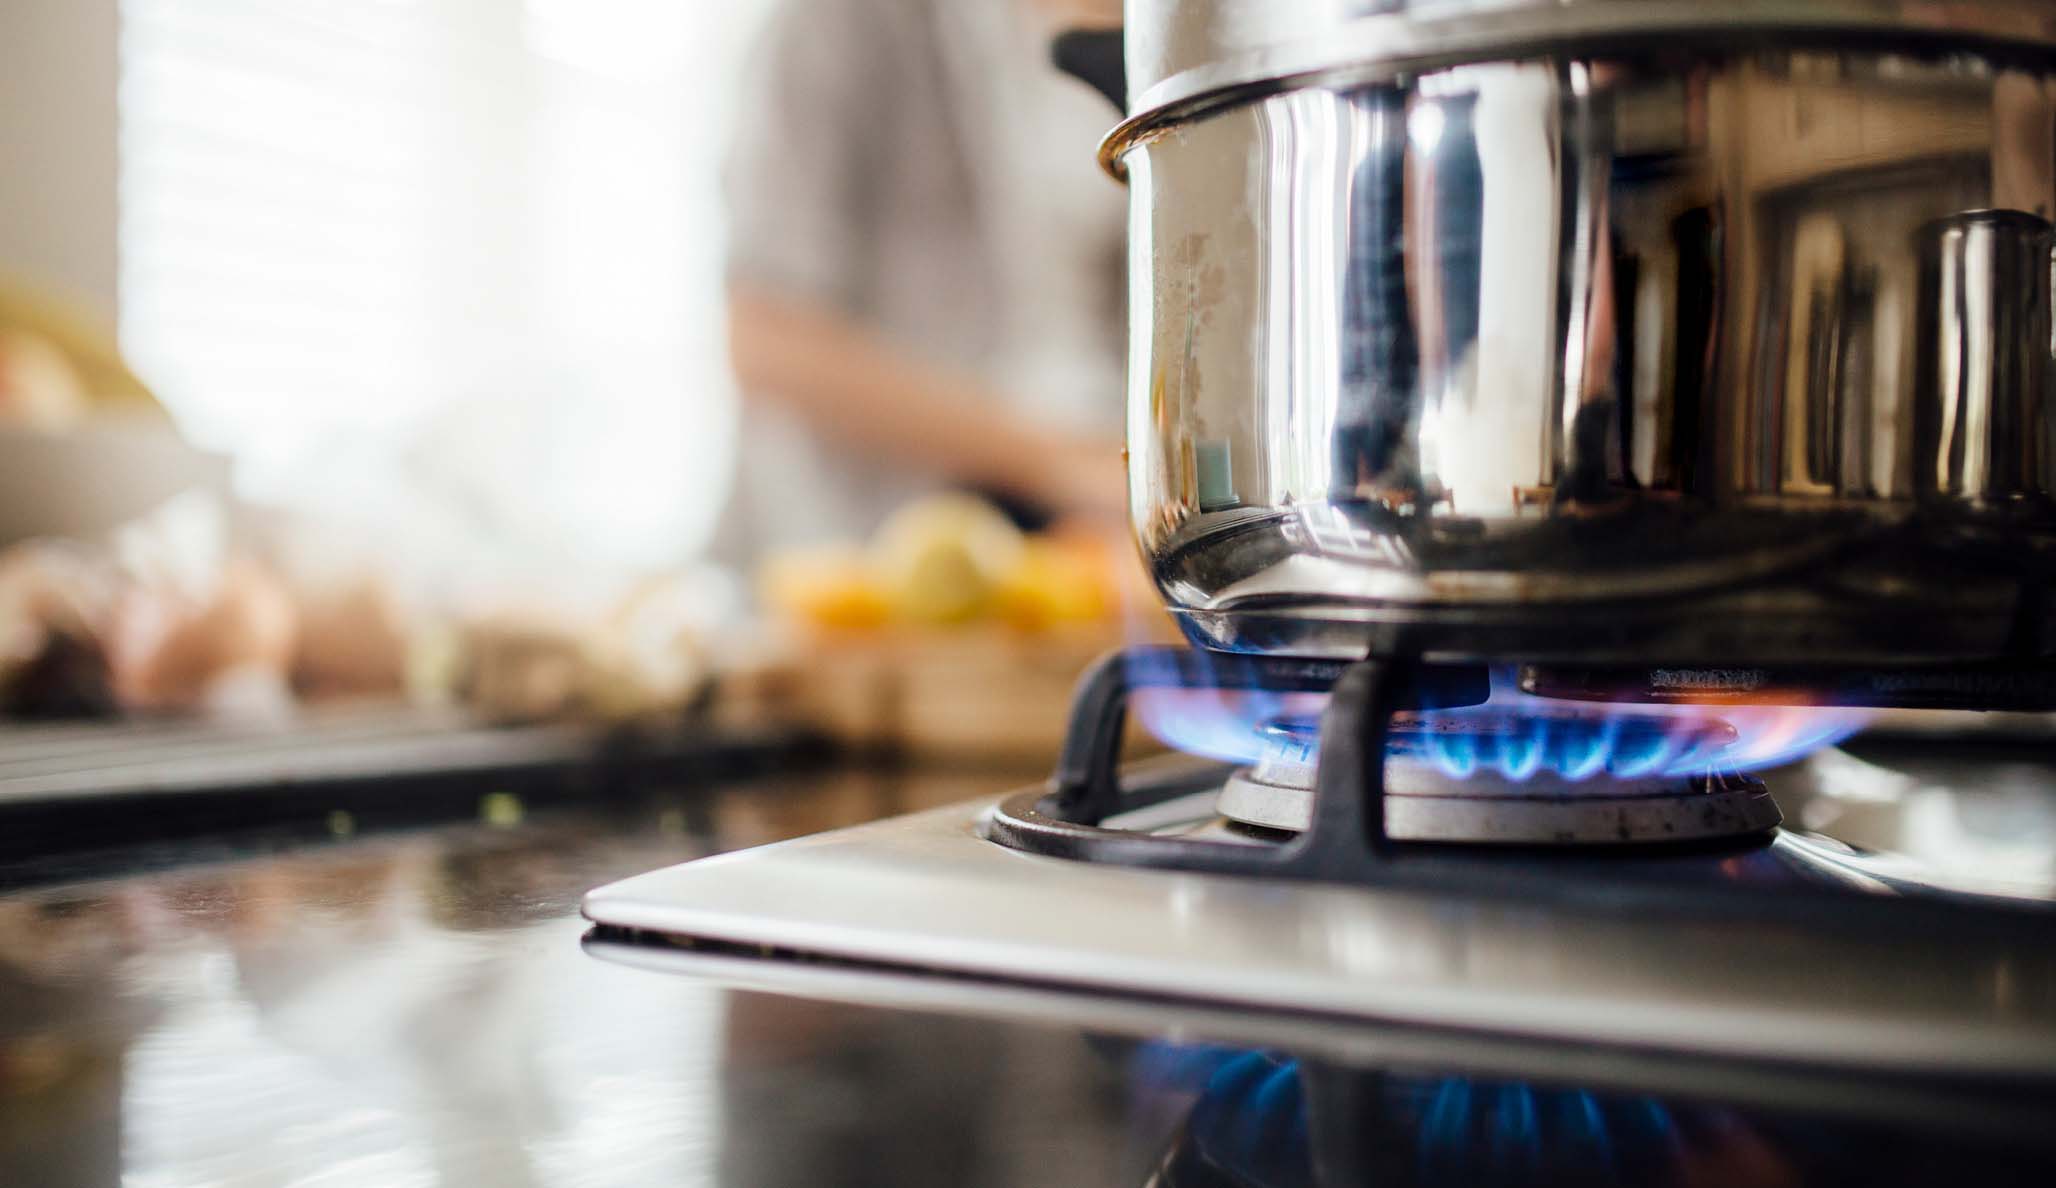 Gas stove at home, natural propane gas burns in kitchen, blue fire